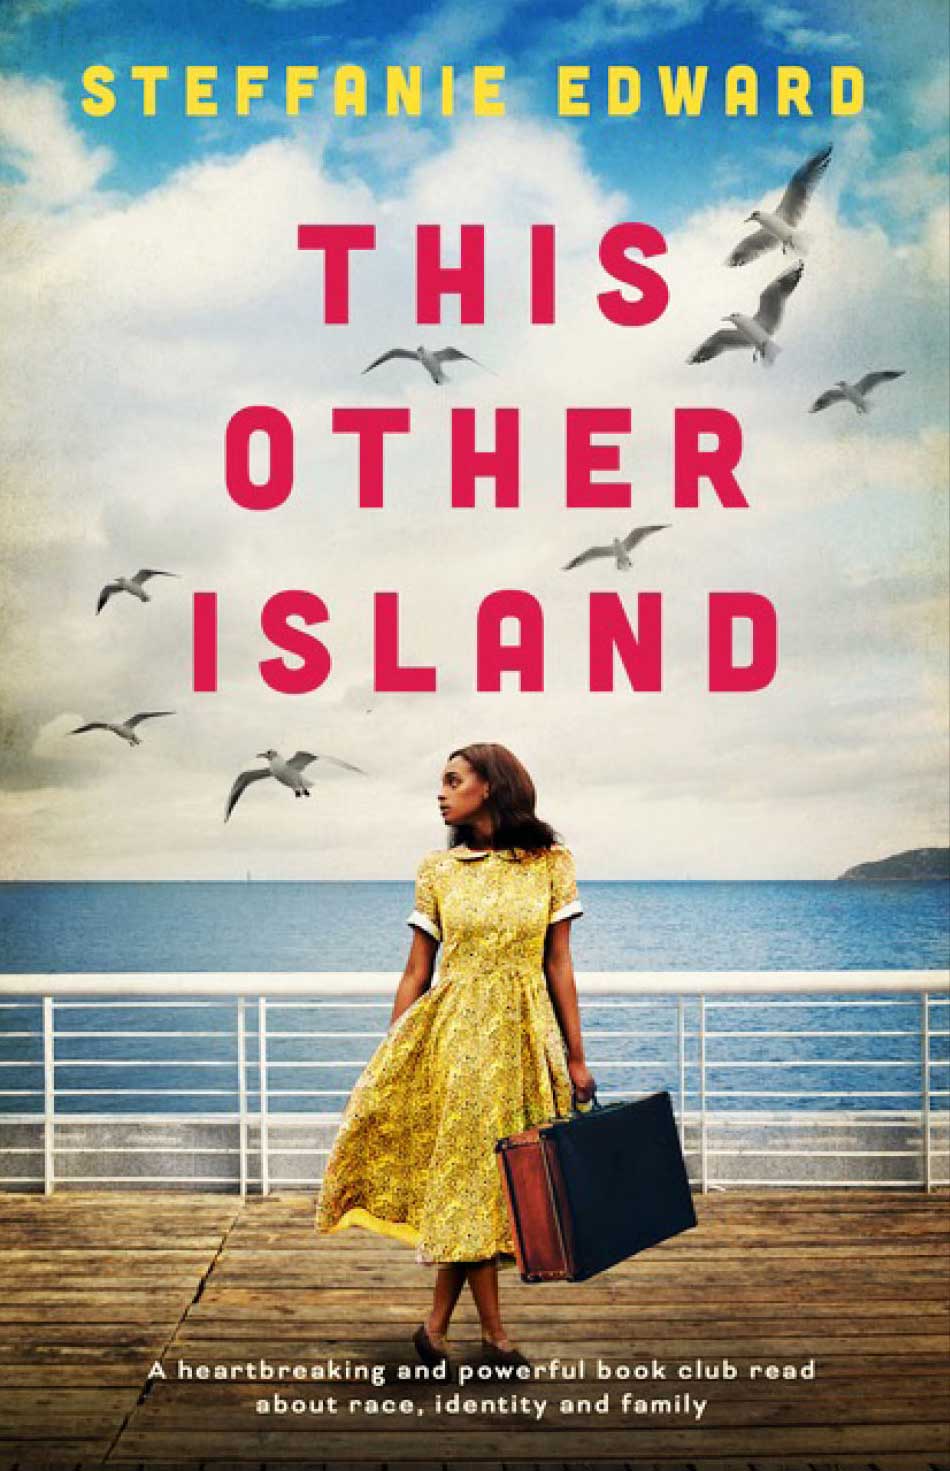 Image of Steffanie Edward's This Other Island